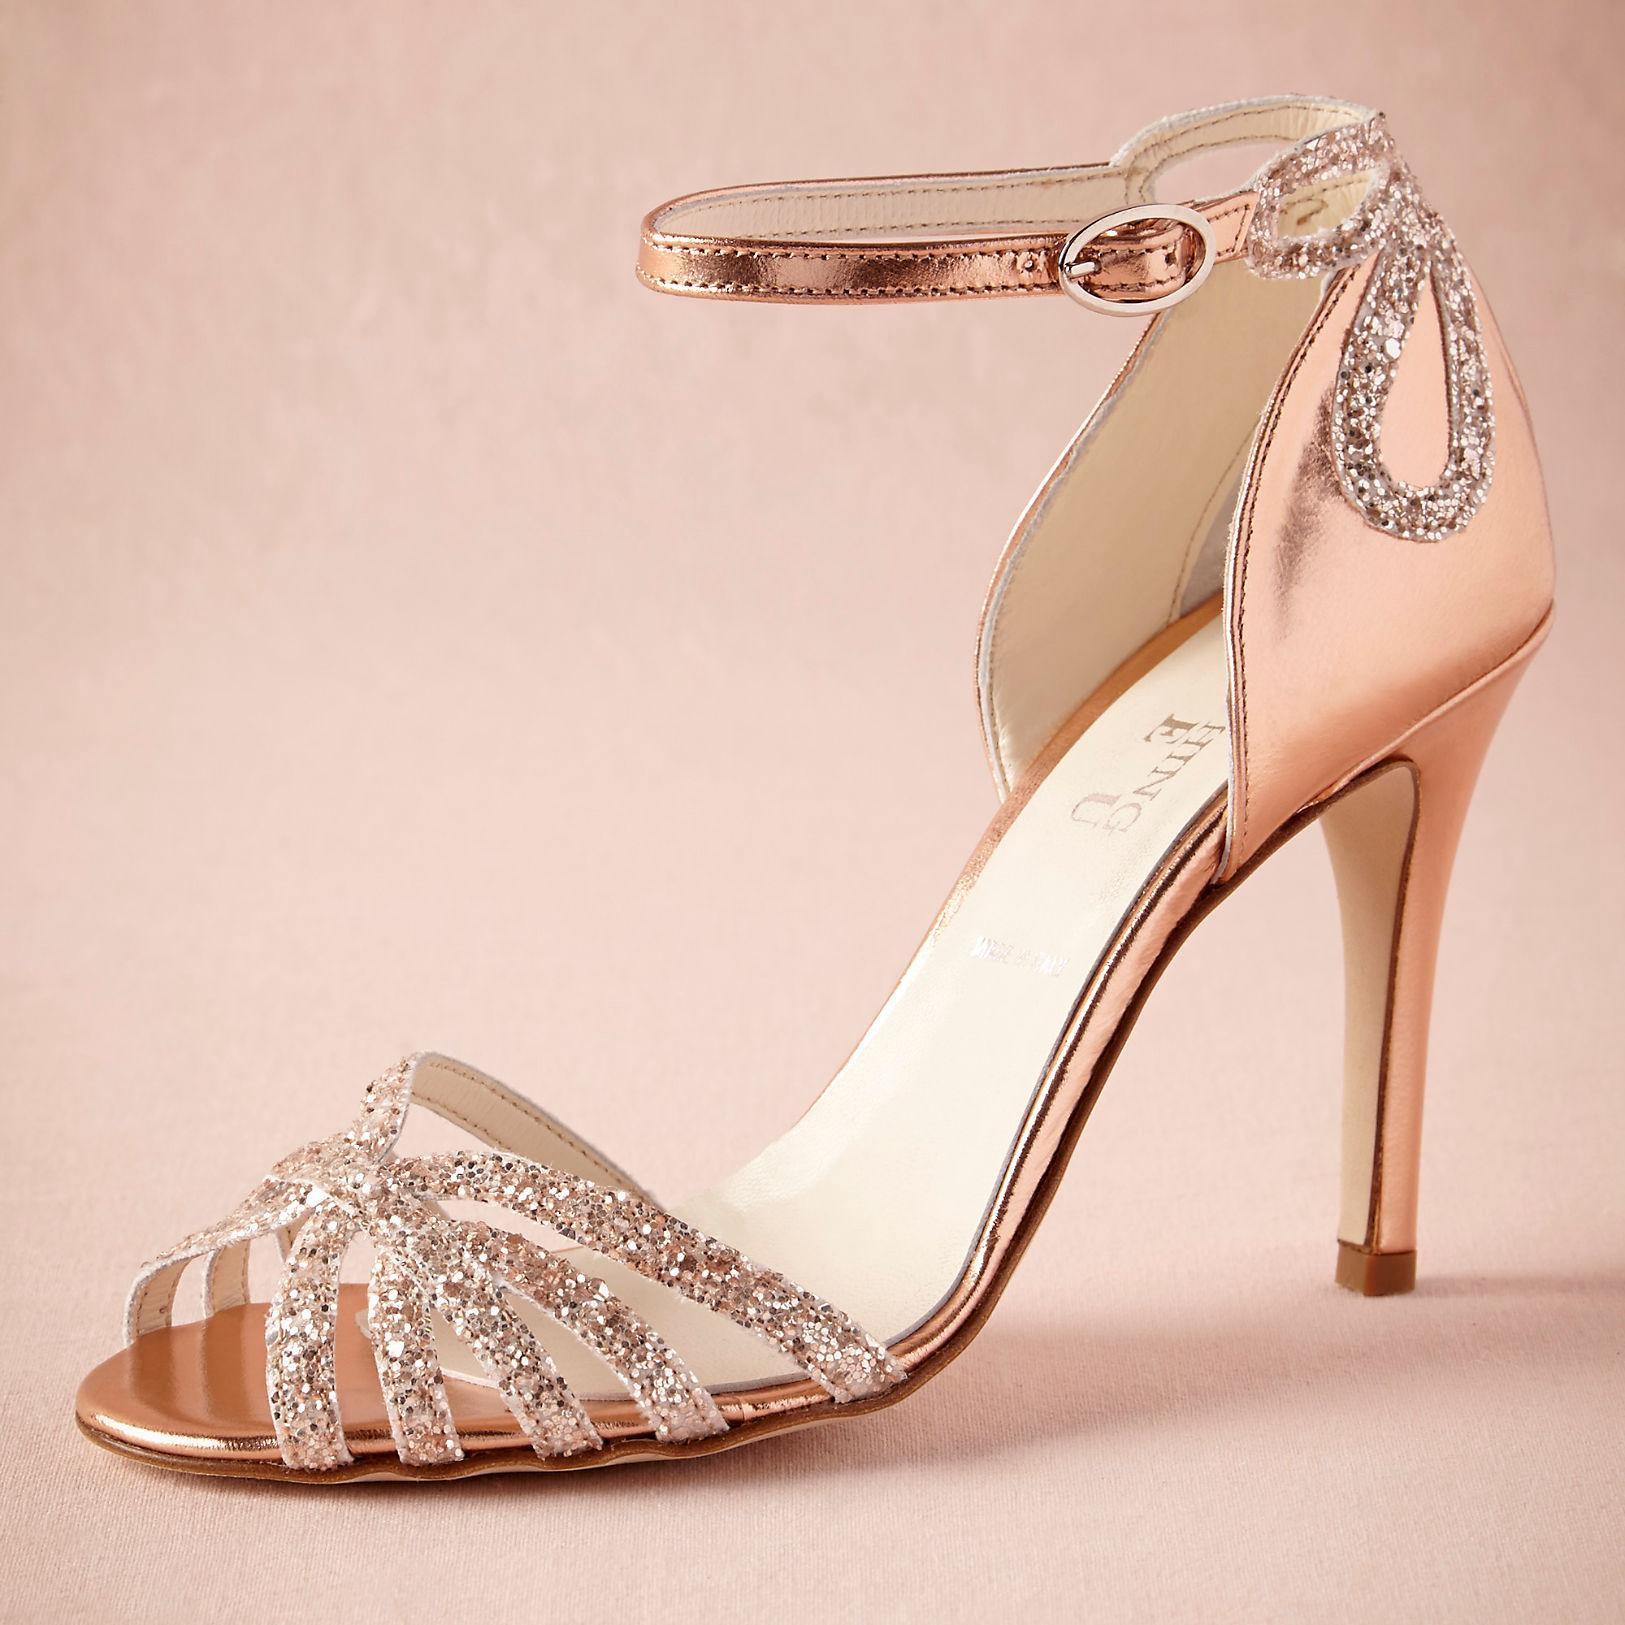 rose-gold-glittered-heel-real-wedding-shoes